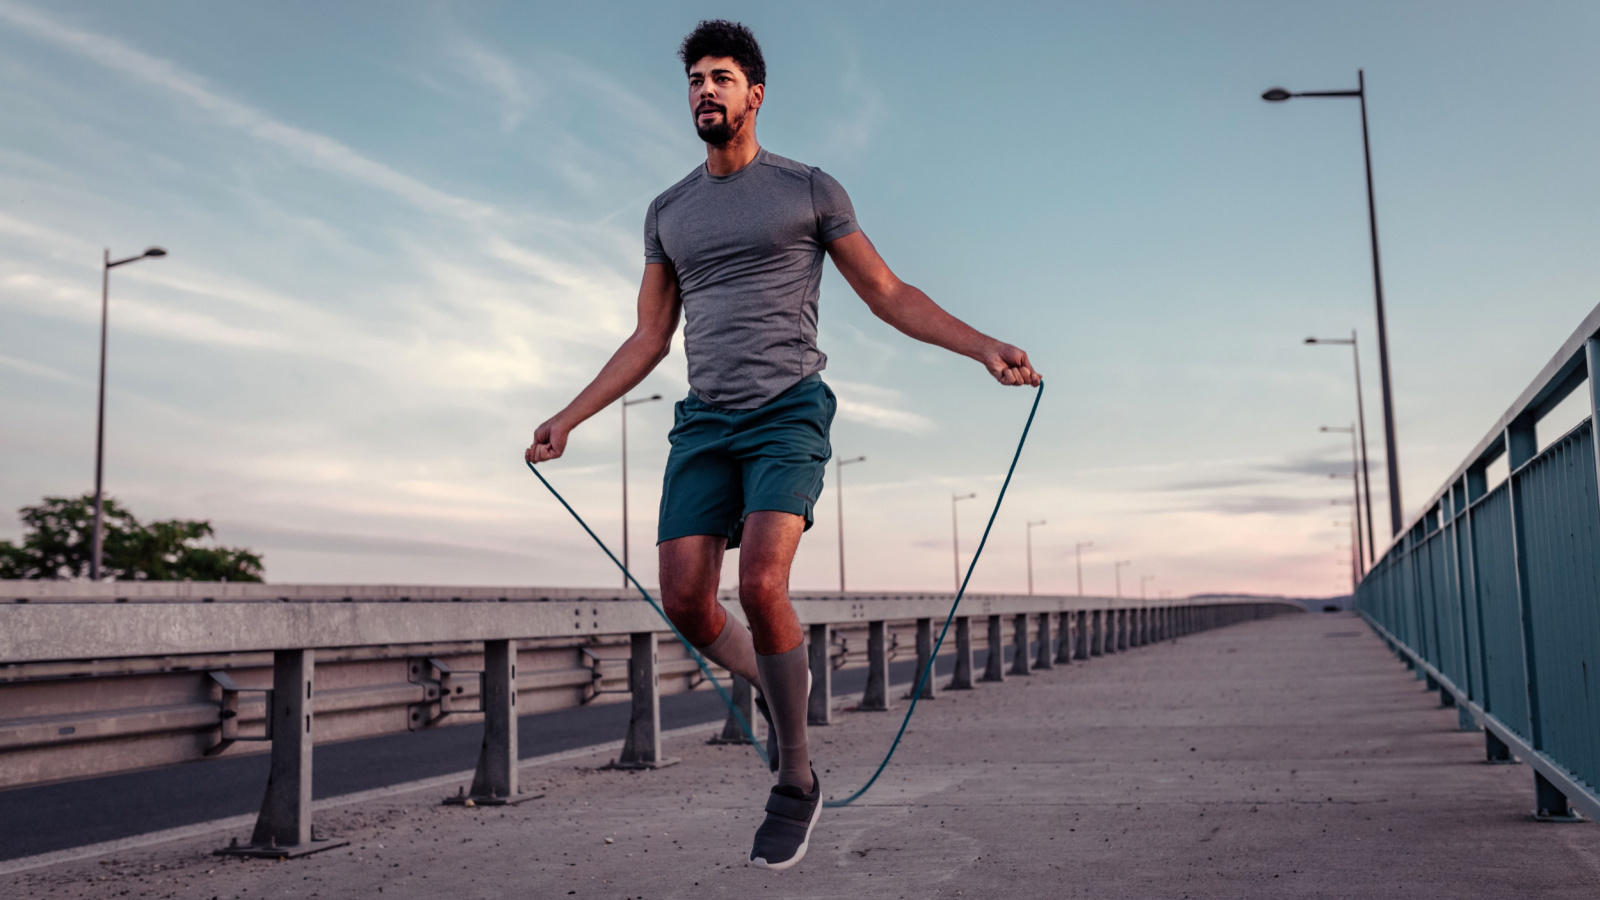 image credit: bbernard/shutterstock <p><span>Jumping rope is a high-intensity activity that improves cardiovascular health, coordination, and agility. It’s a fun, challenging way to add variety to your fitness routine. Plus, it’s portable and can be done almost anywhere.</span></p>